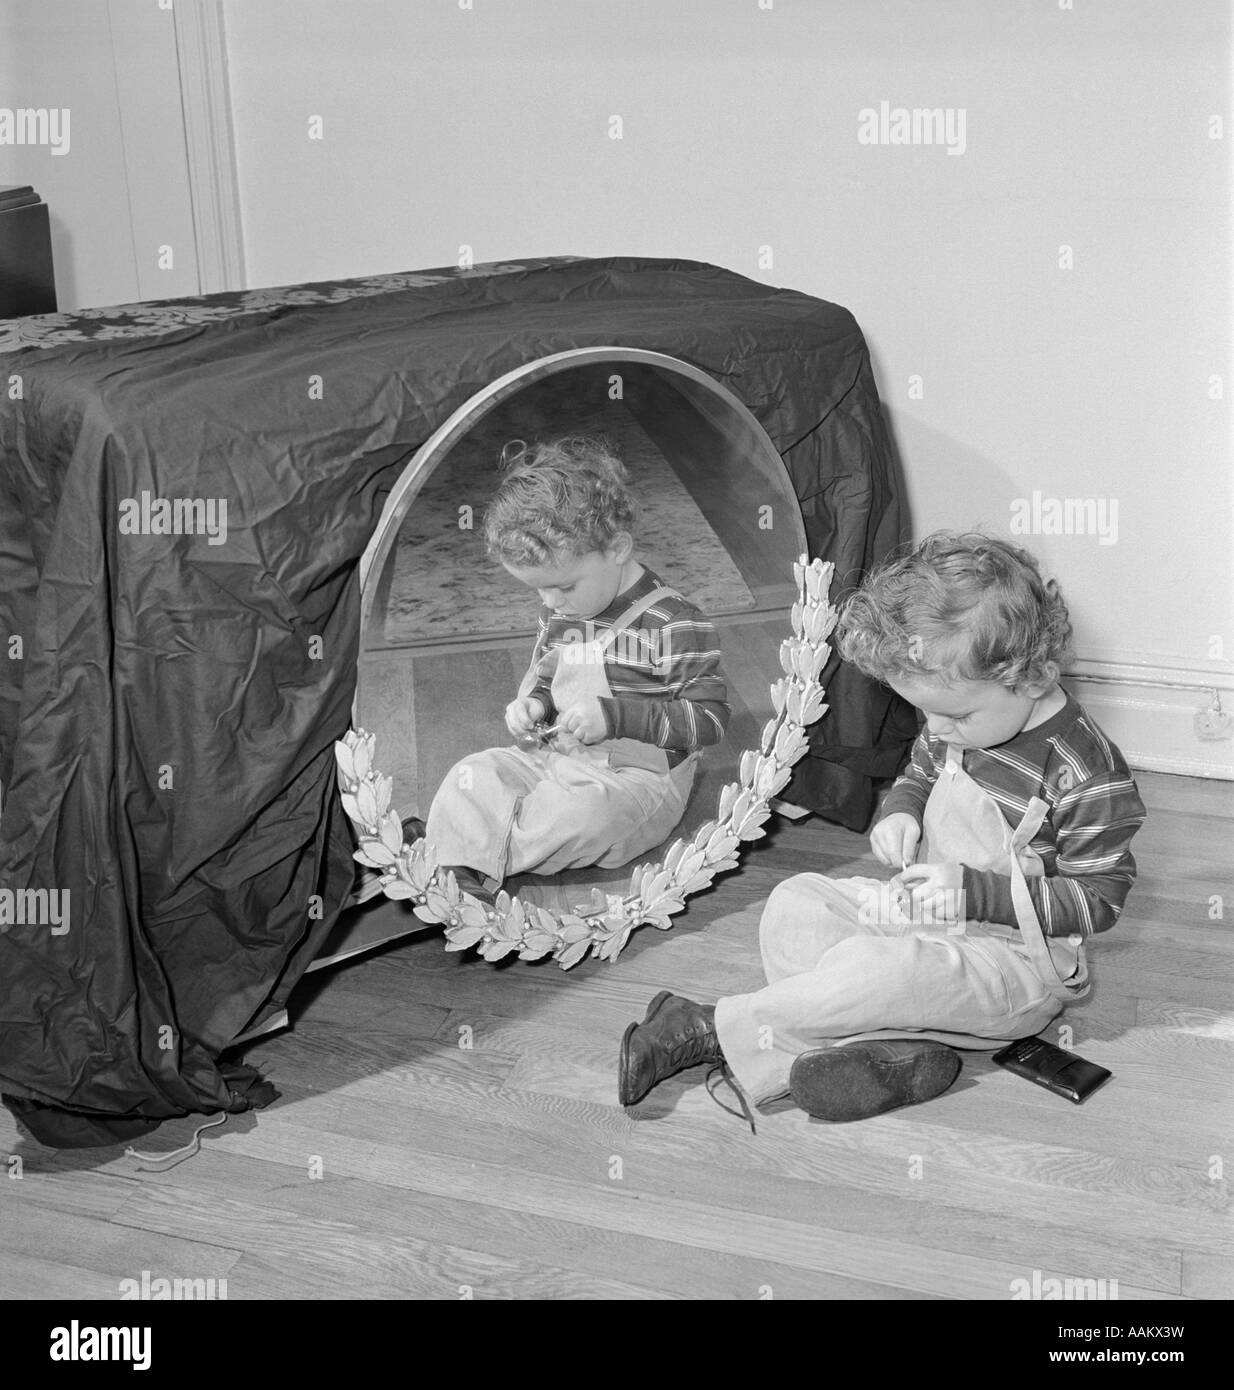 1950s SMALL BOY SITTING ON FLOOR BEFORE MIRROR PLAYING WITH TRINKET Stock Photo